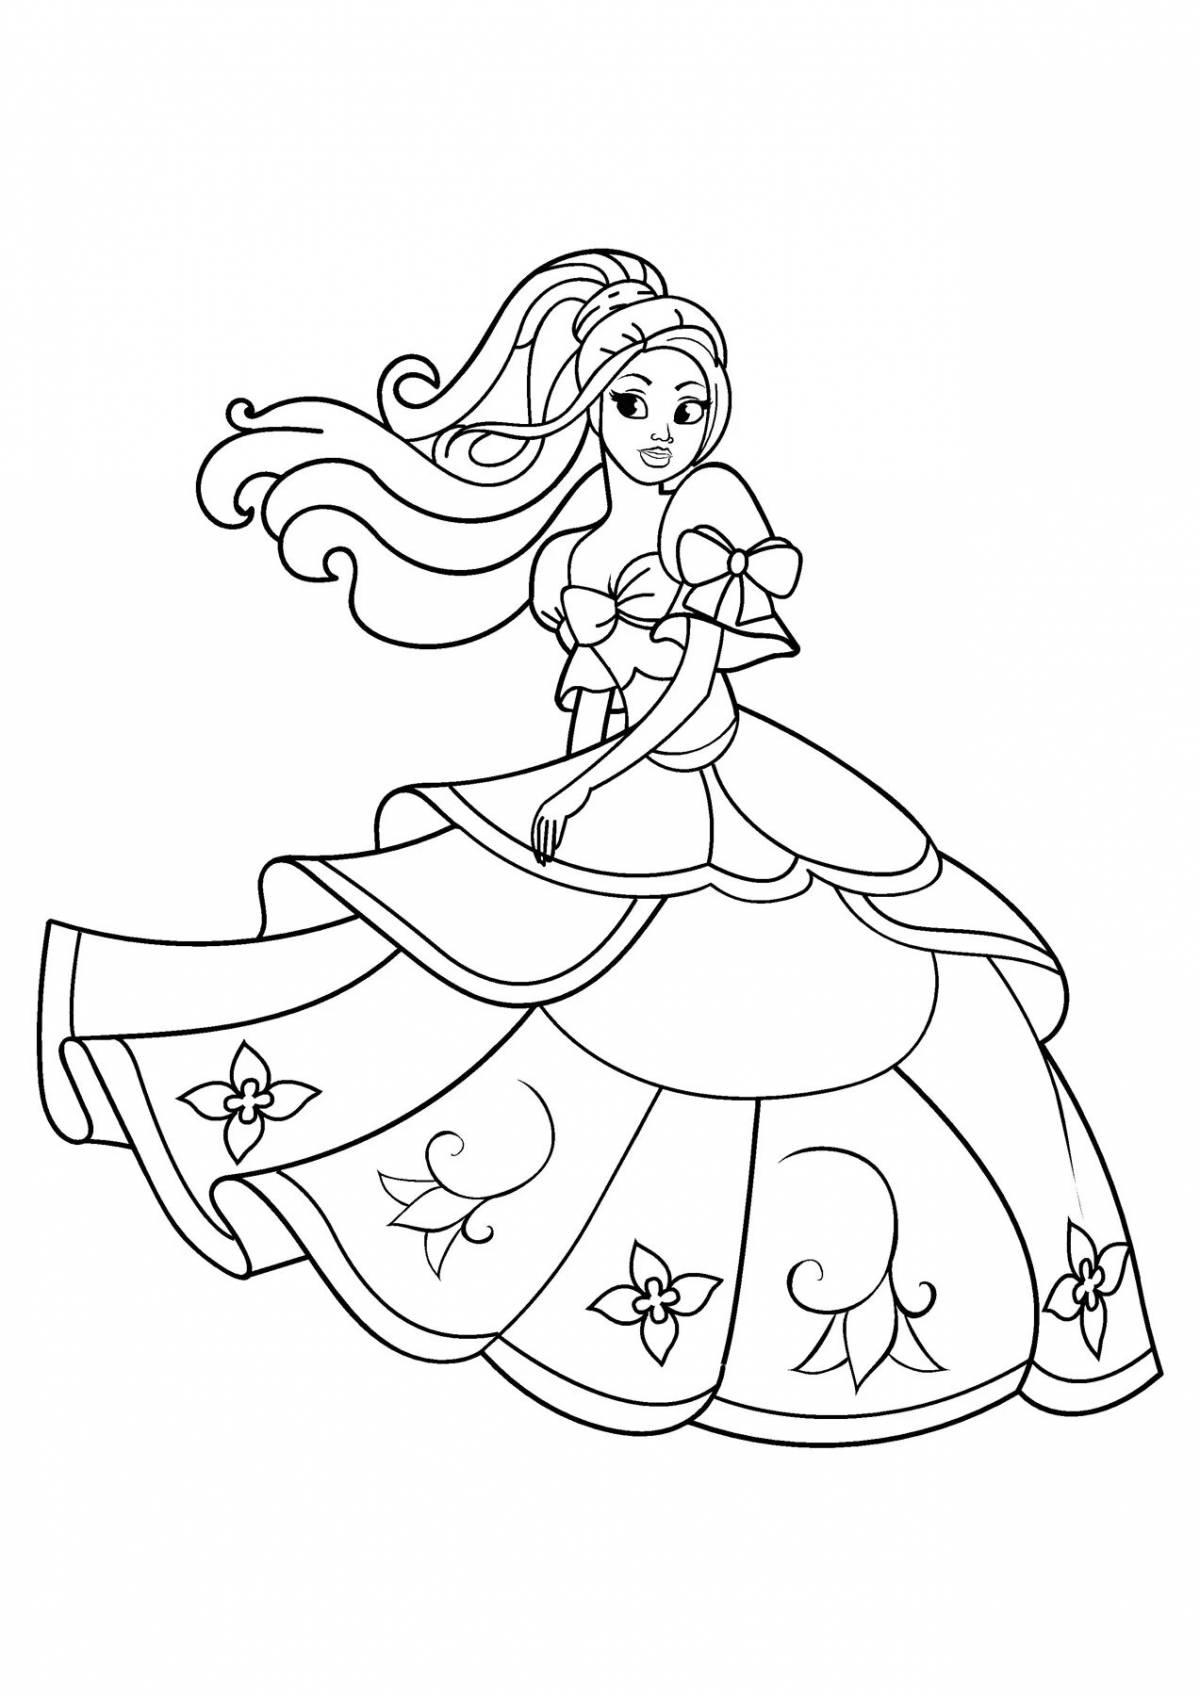 Fancy princess coloring for girls 4 years old